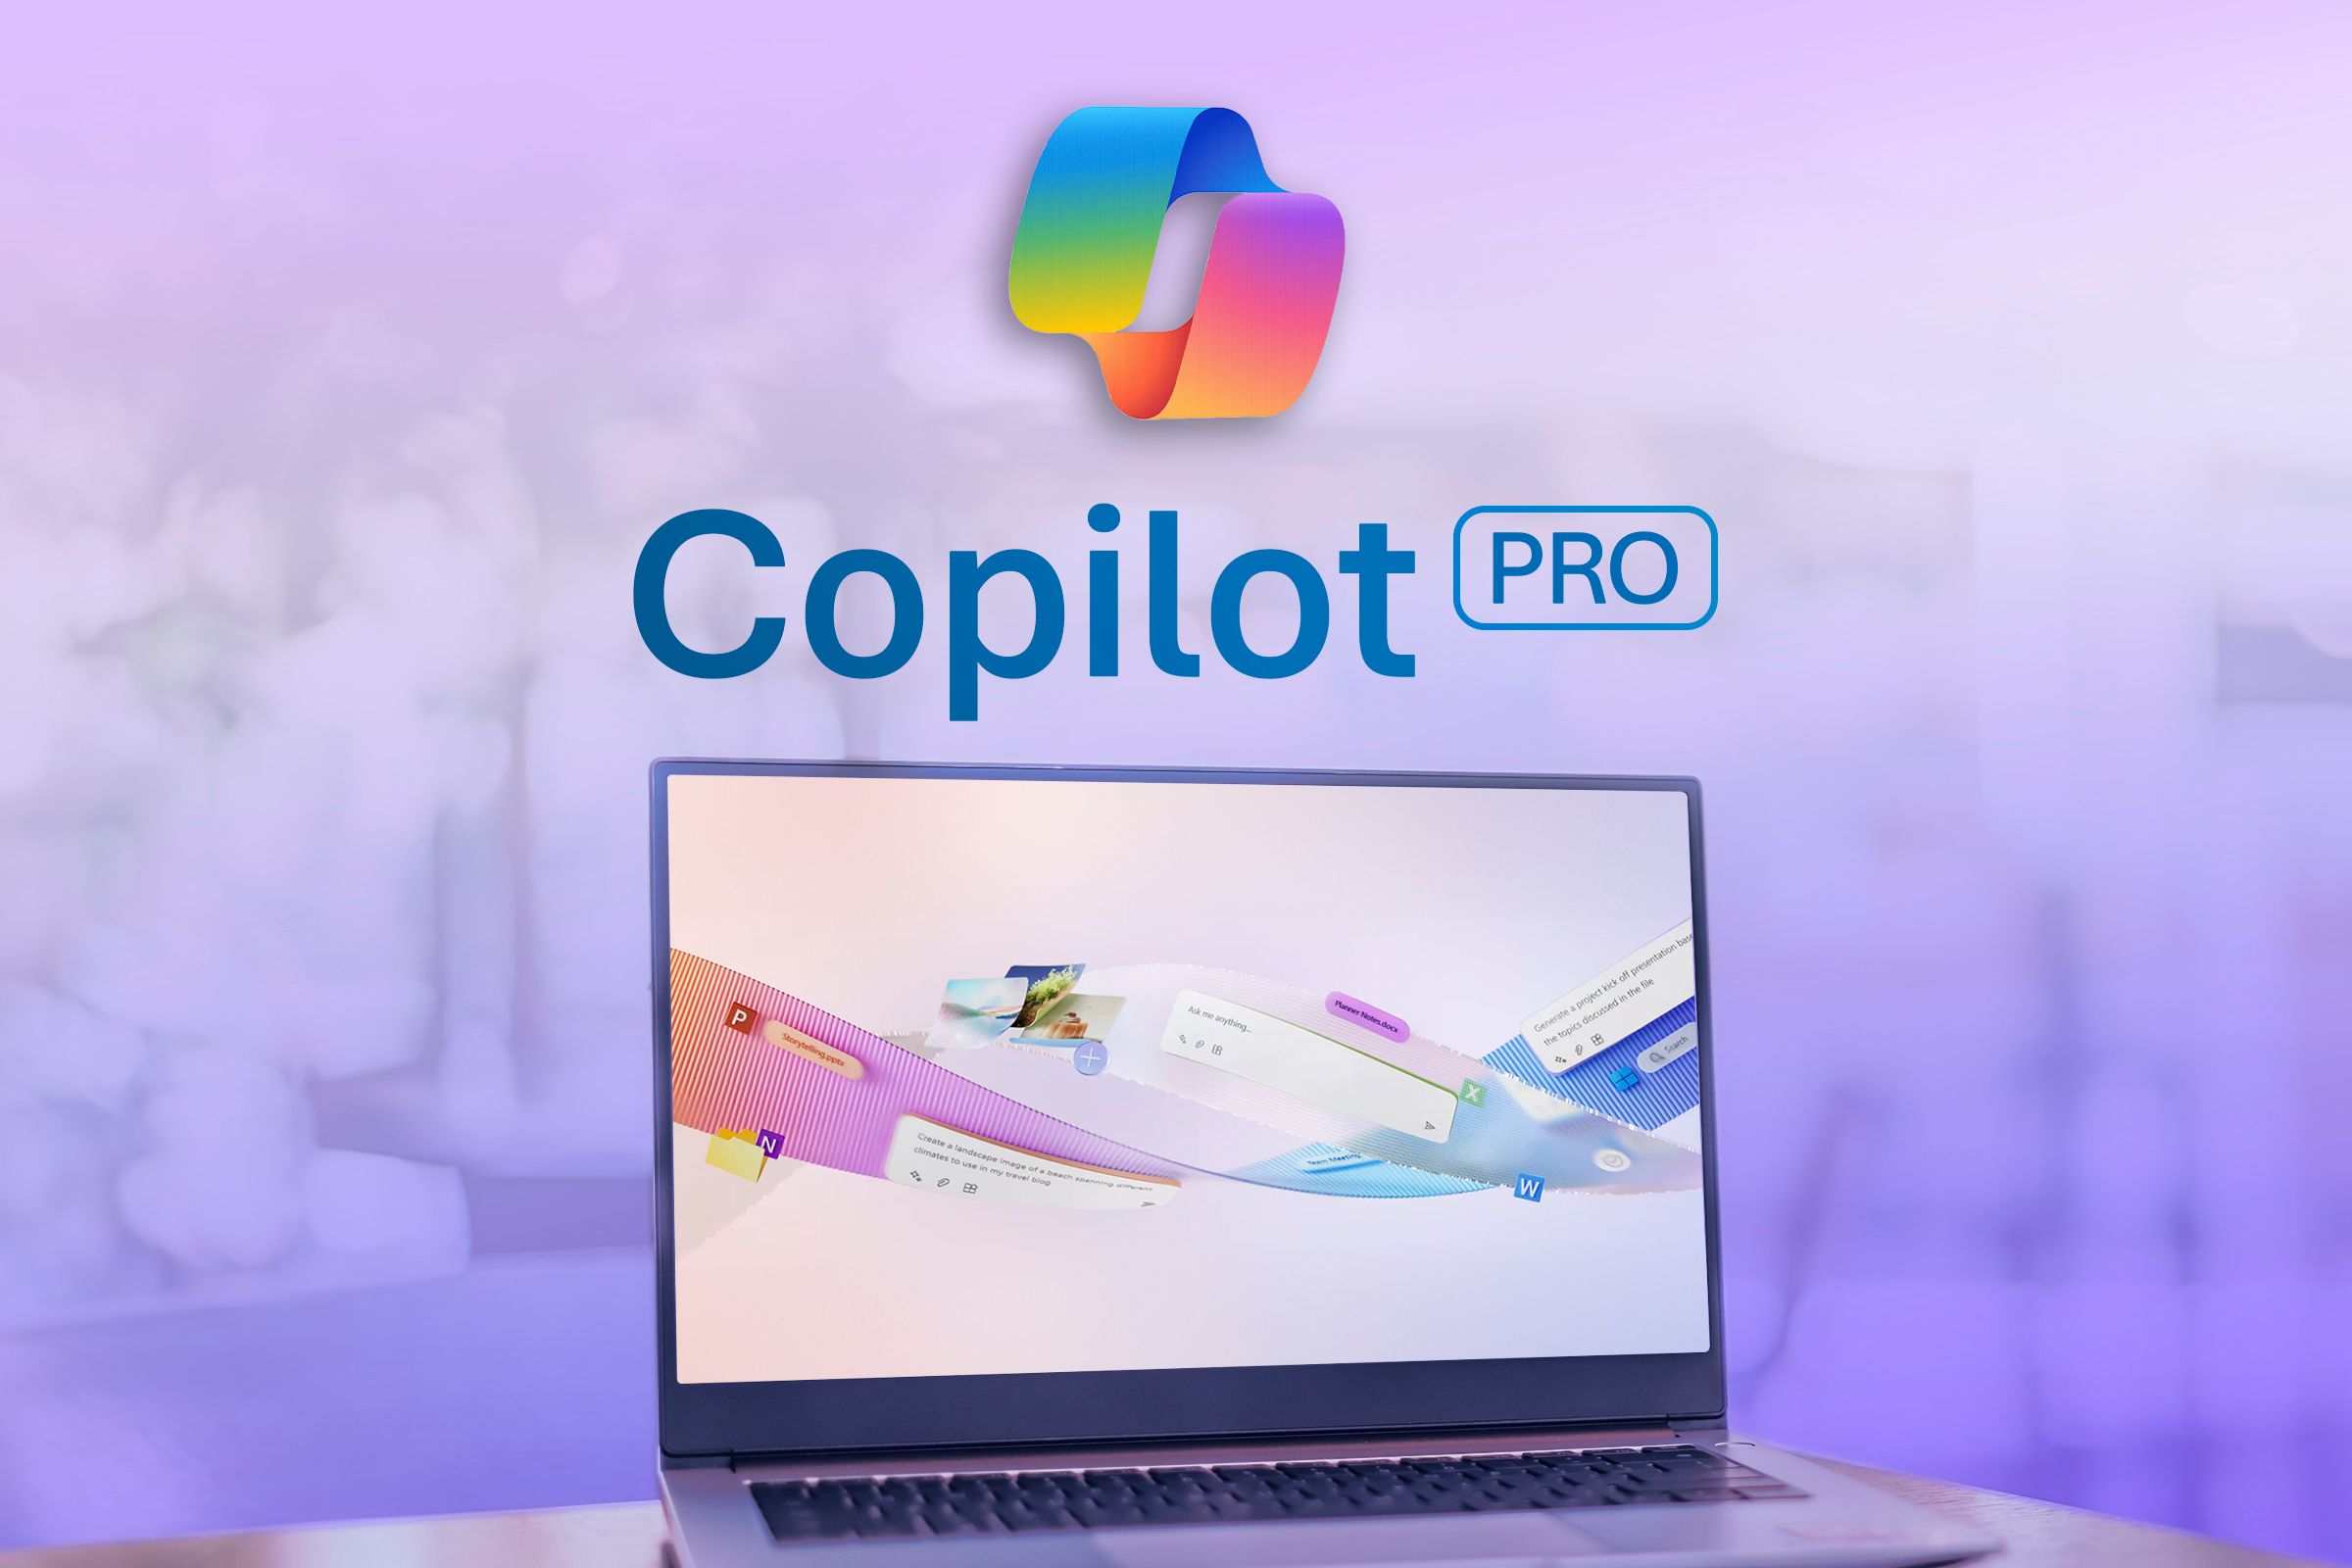 Microsoft Copilot logo at the top center with the word 'Copilot PRO' below and a notebook with the Microsoft Copilot featured image below this text